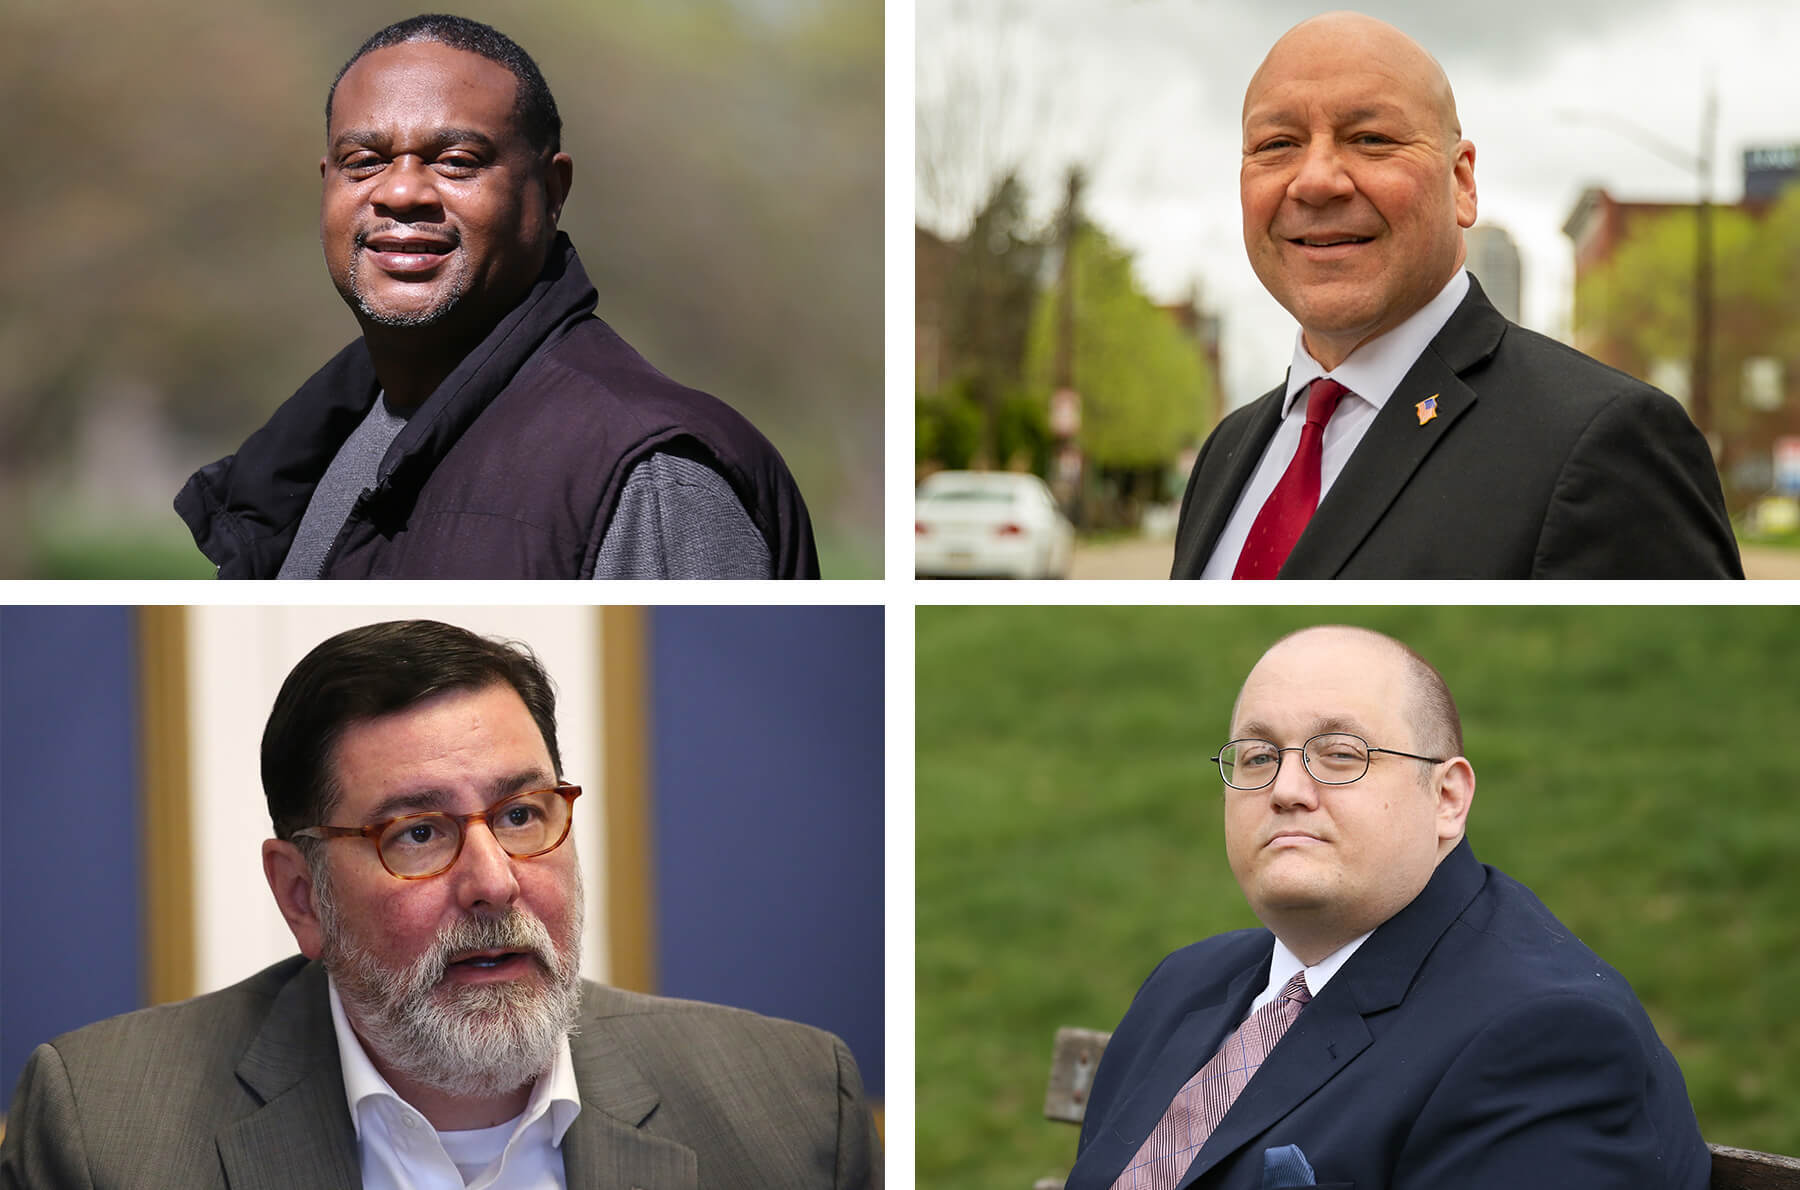 All four Democratic candidates for Pittsburgh Mayor